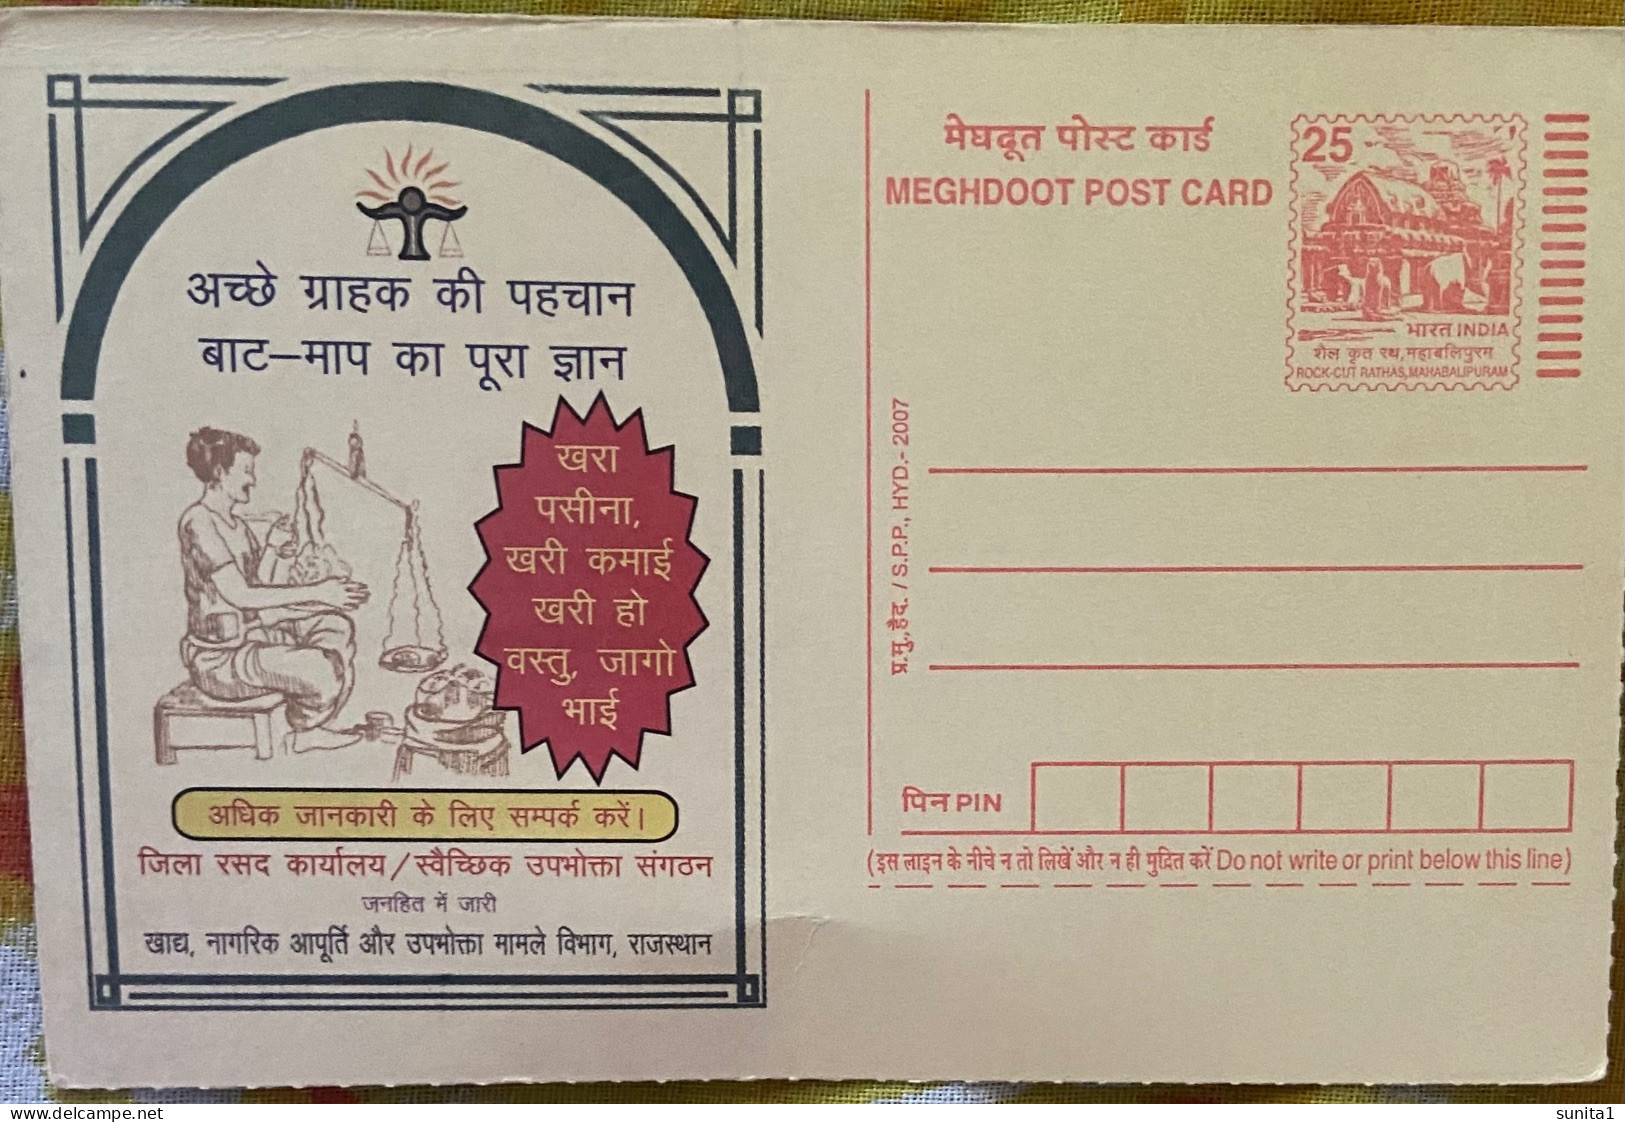 Weighing Scale, Weights, Shopkeeper, Street Vendor, Consumer Rights, Awareness,, Meghdoot, Postal Stationery, India - Alimentación